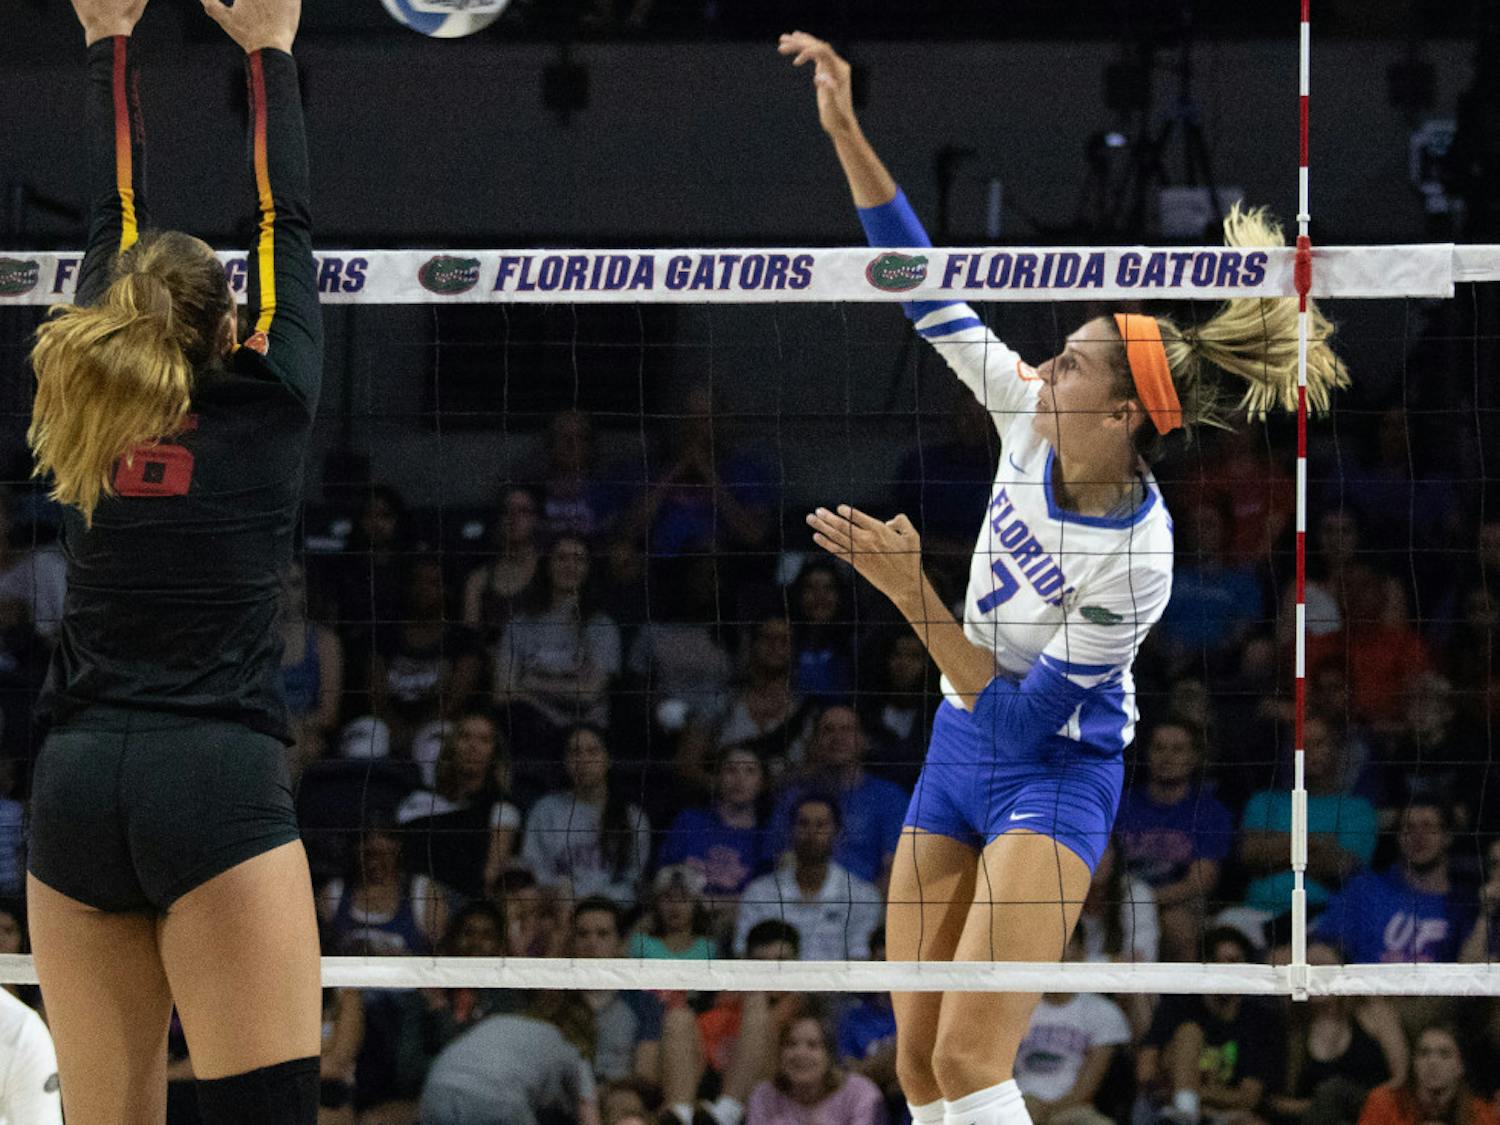 Junior outside hitter Paige Hammons led all players with 12 kills in Sunday's match between No. 11 Florida and Mississippi State in Starkville, Mississippi. 